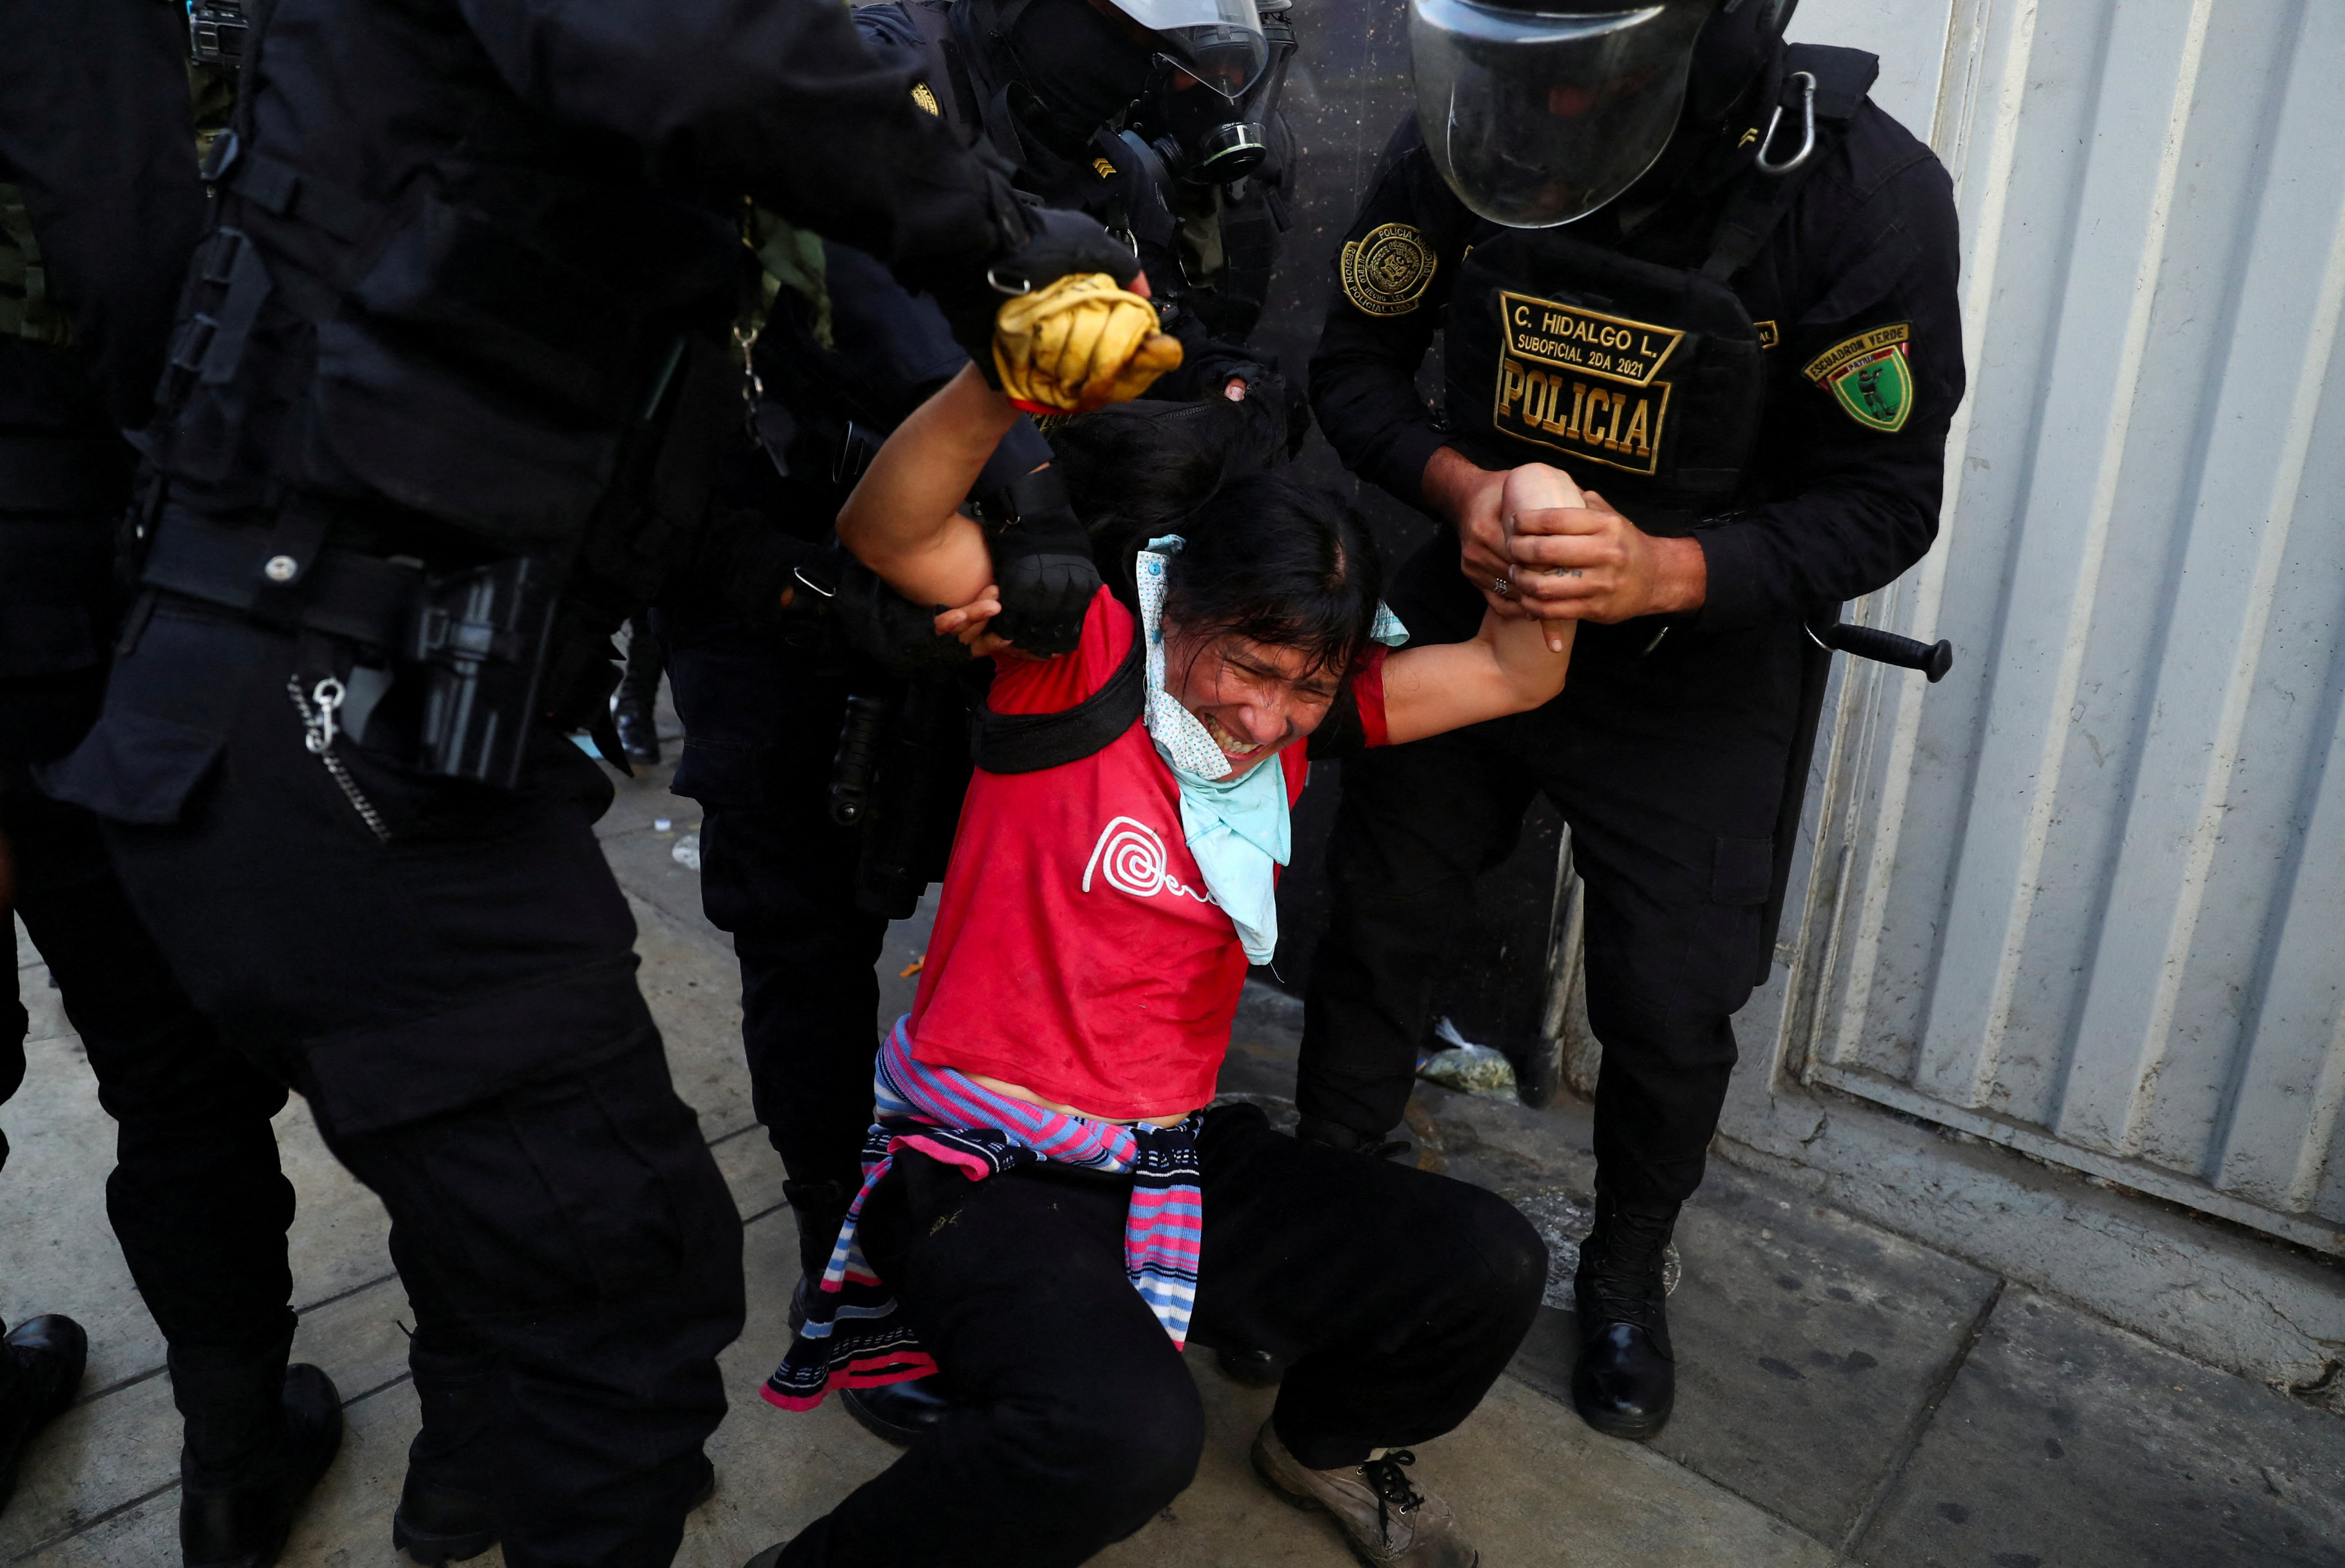 Tuesday was another day of fury in Peru’s capital as thousands of protesters took to downtown Lima. Photo: Reuters